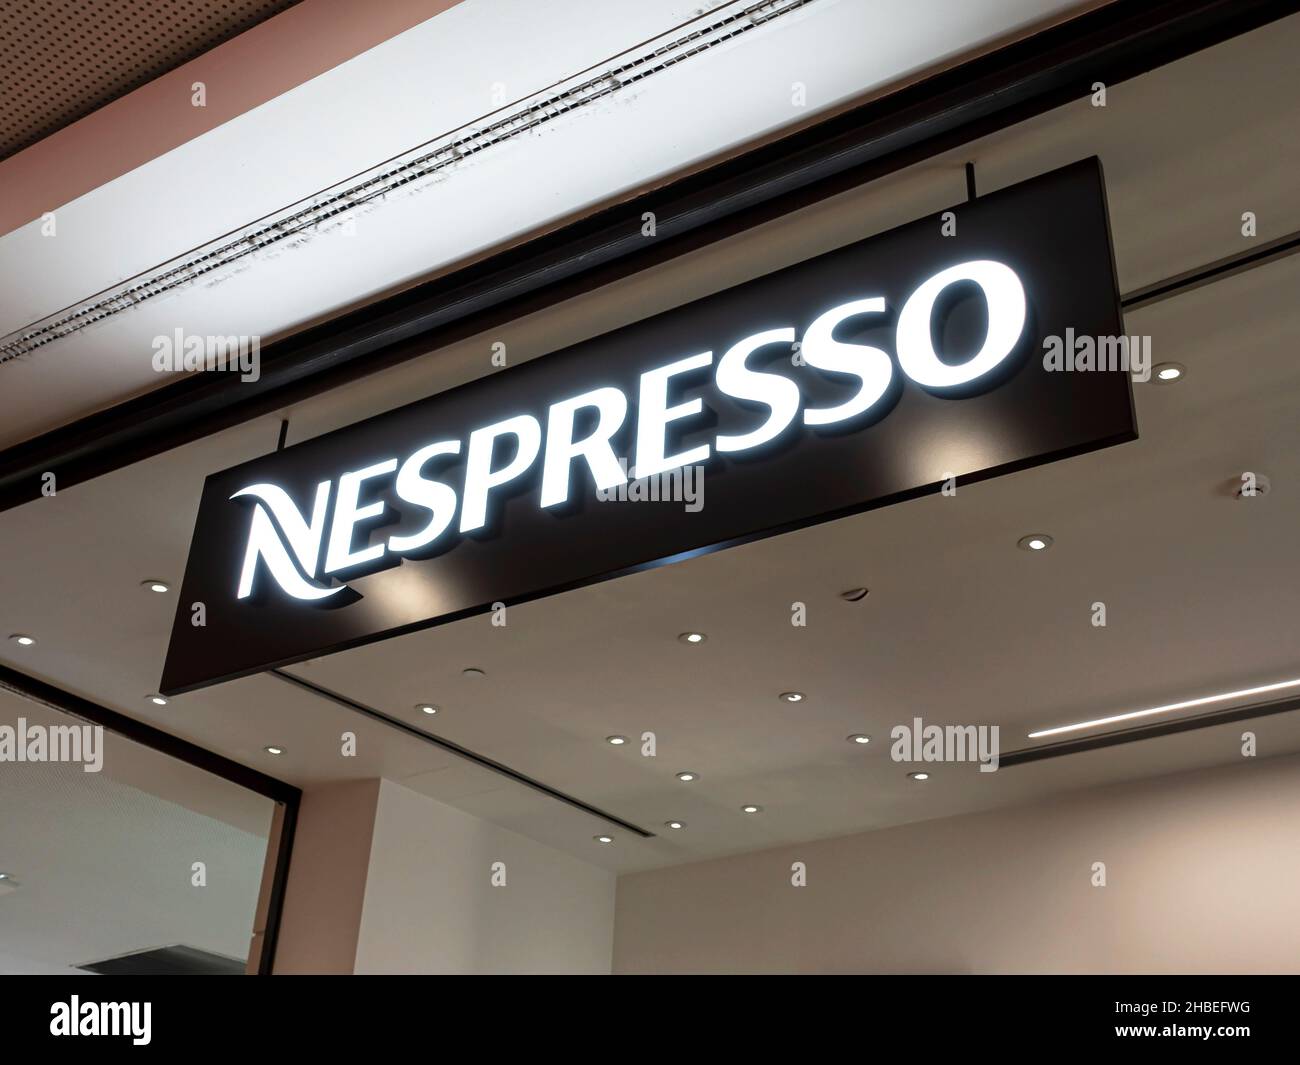 Nespresso Store Sign High Resolution Stock Photography and Images - Alamy